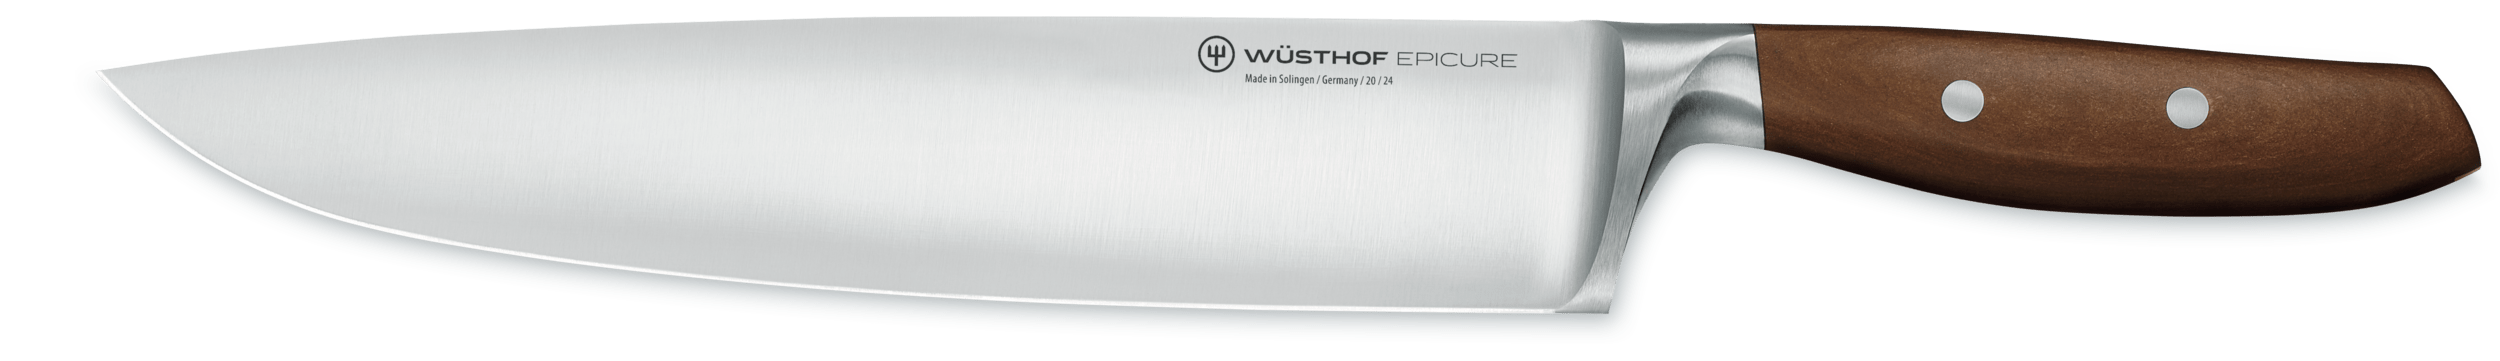 Wusthof Epicure Chef's knife 24cm 1010600124